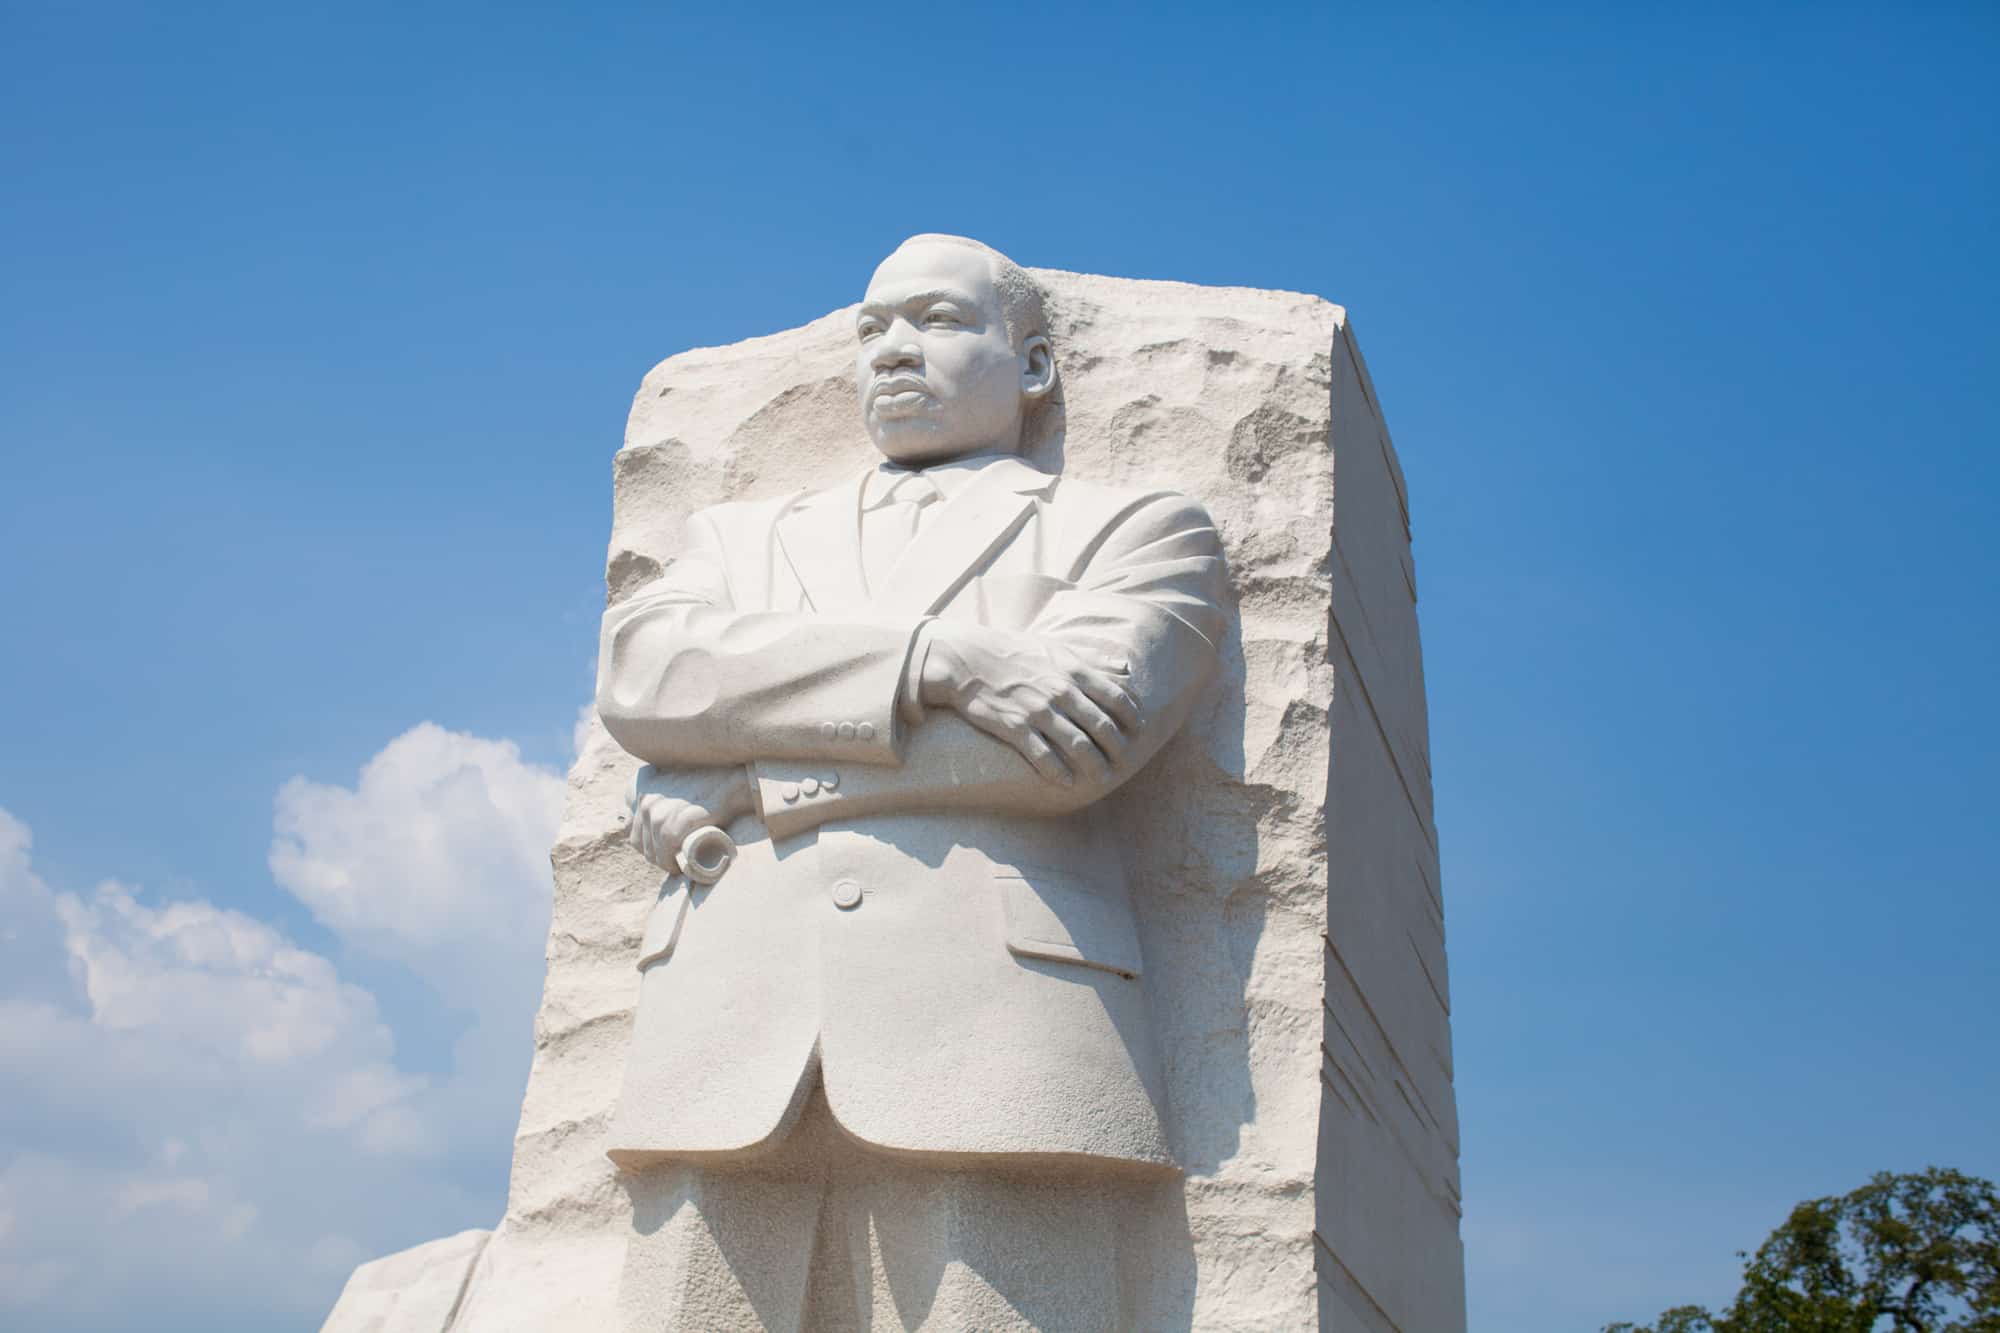 Washington Dc, Attractions Archive, Washington-Dc-Attractions-Martin-Luther-King.